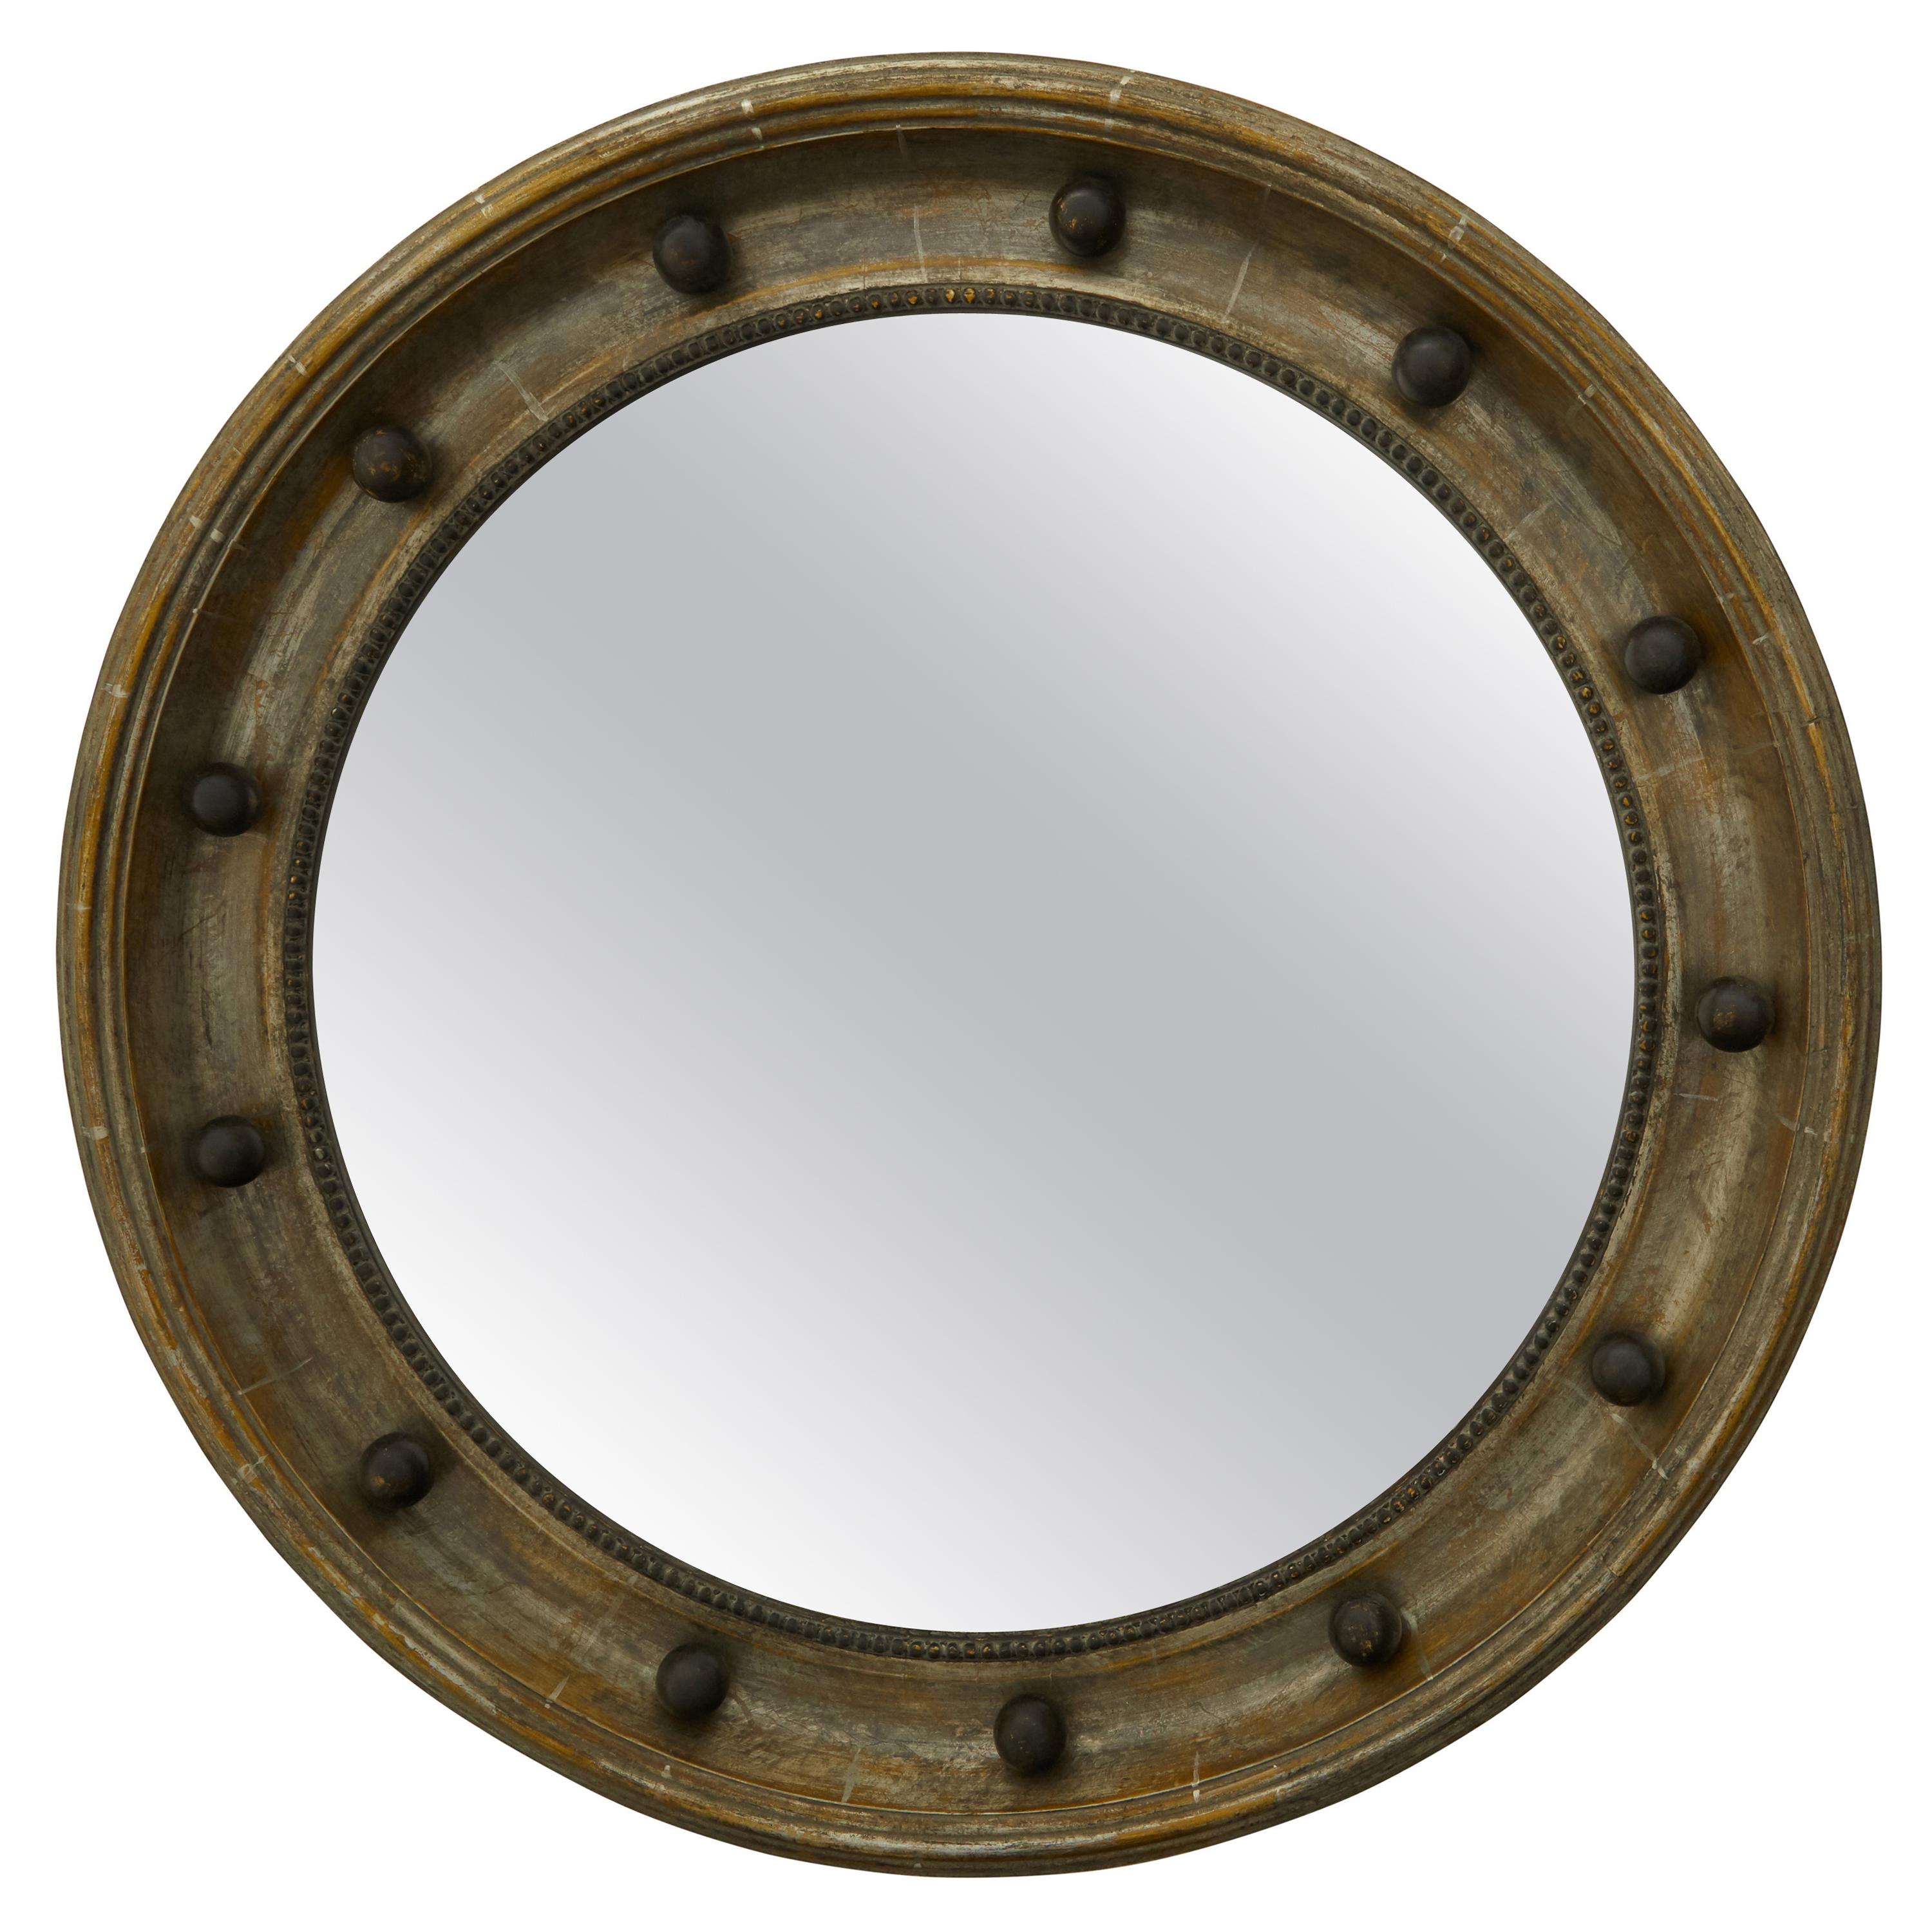 English 1900s Silver Leaf Beaded Convex Bullseye Mirror with Ebonized Accents For Sale